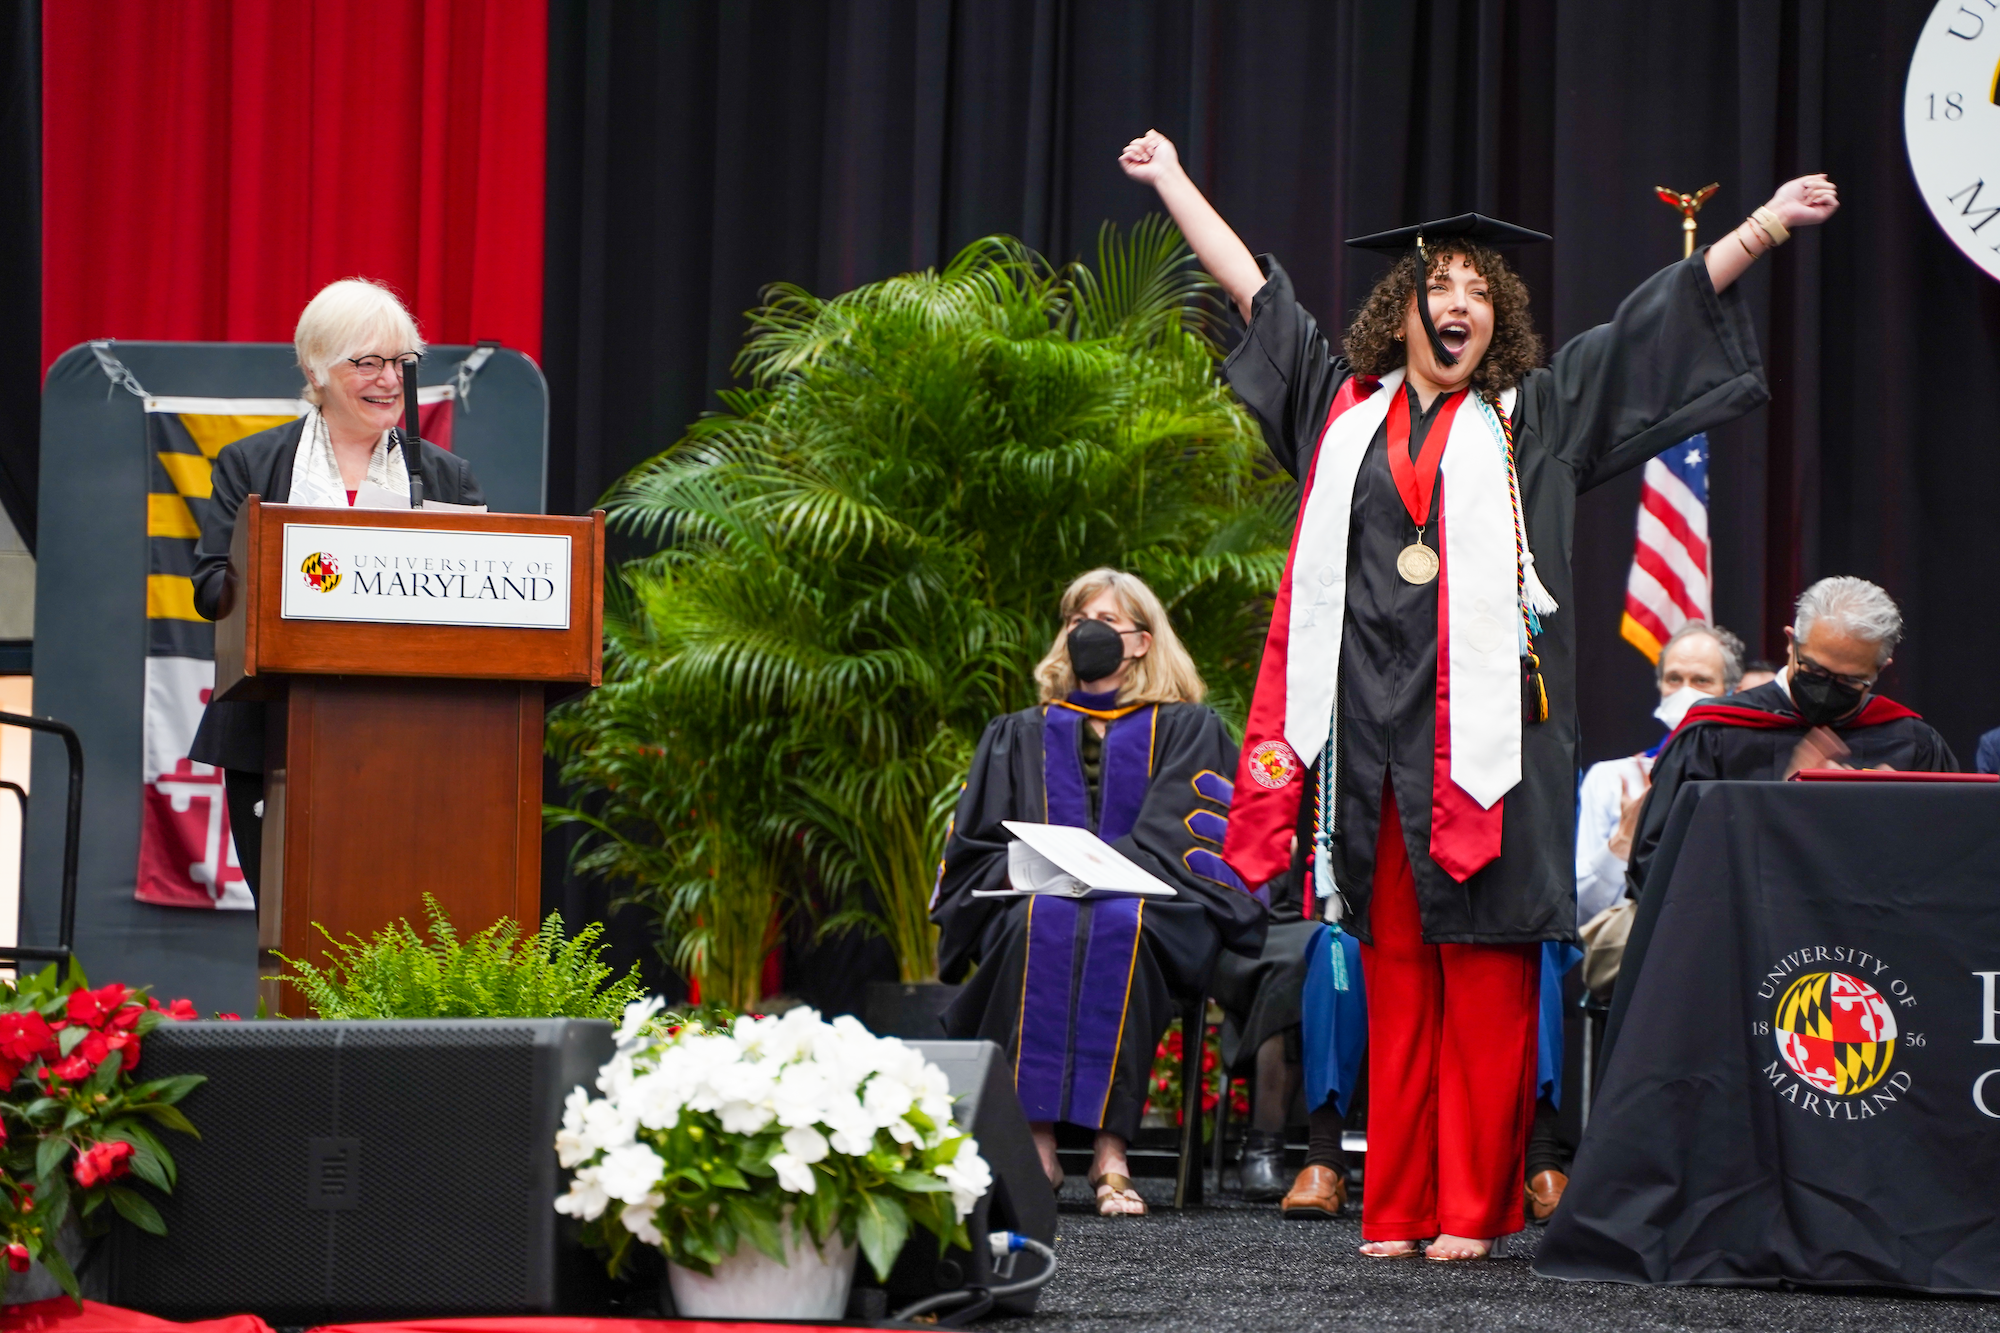 Jenna Cohen celebrates her honor at 2022 Merrill Commencement Ceremony